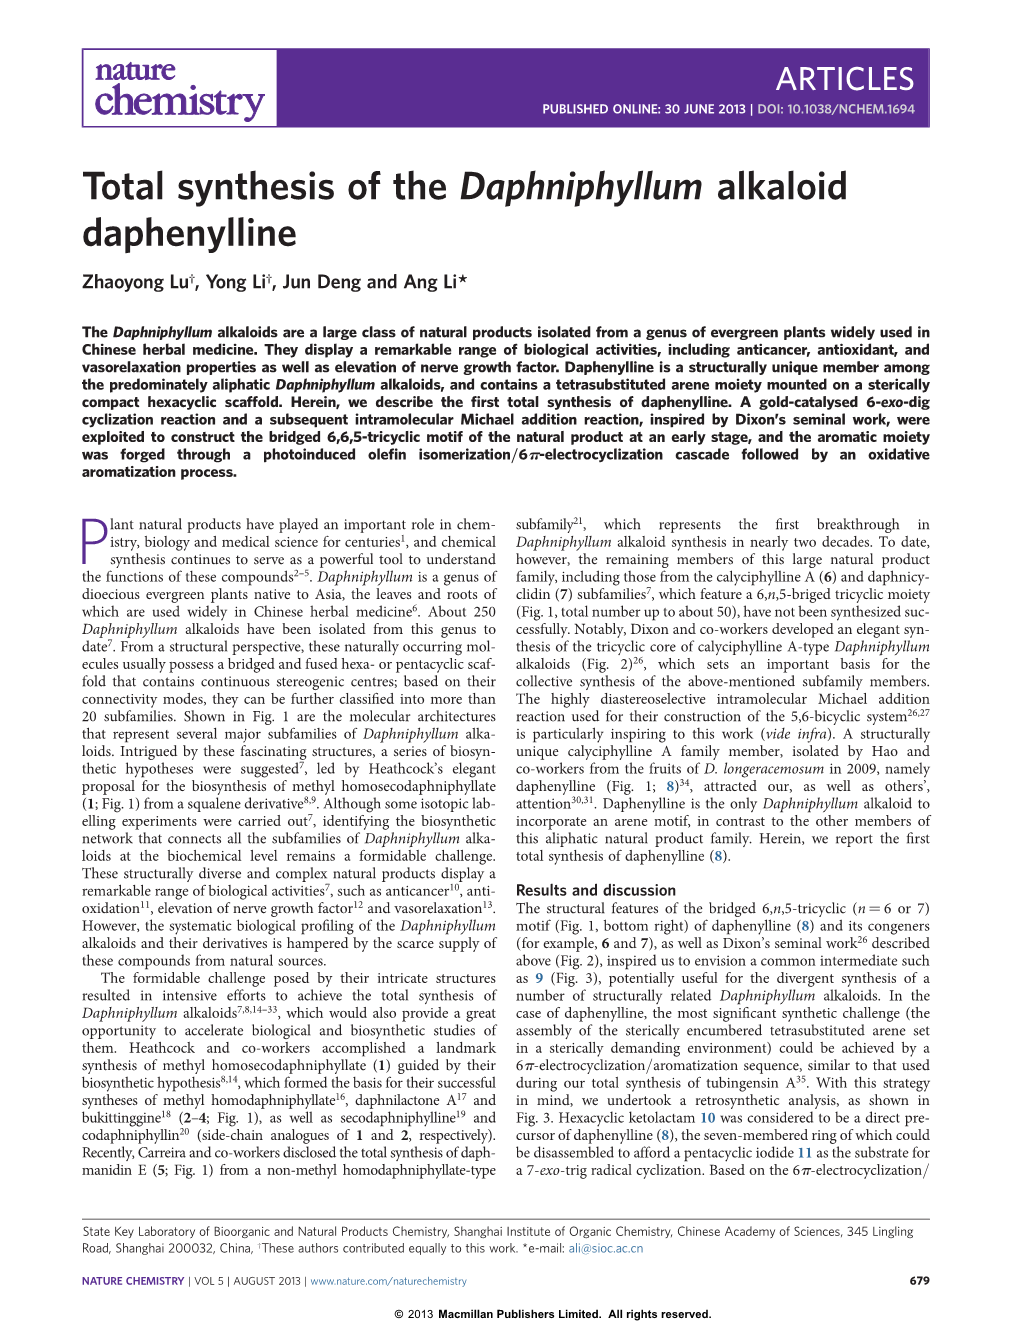 Total Synthesis of the &lt;I&gt;Daphniphyllum&lt;/I&gt; Alkaloid